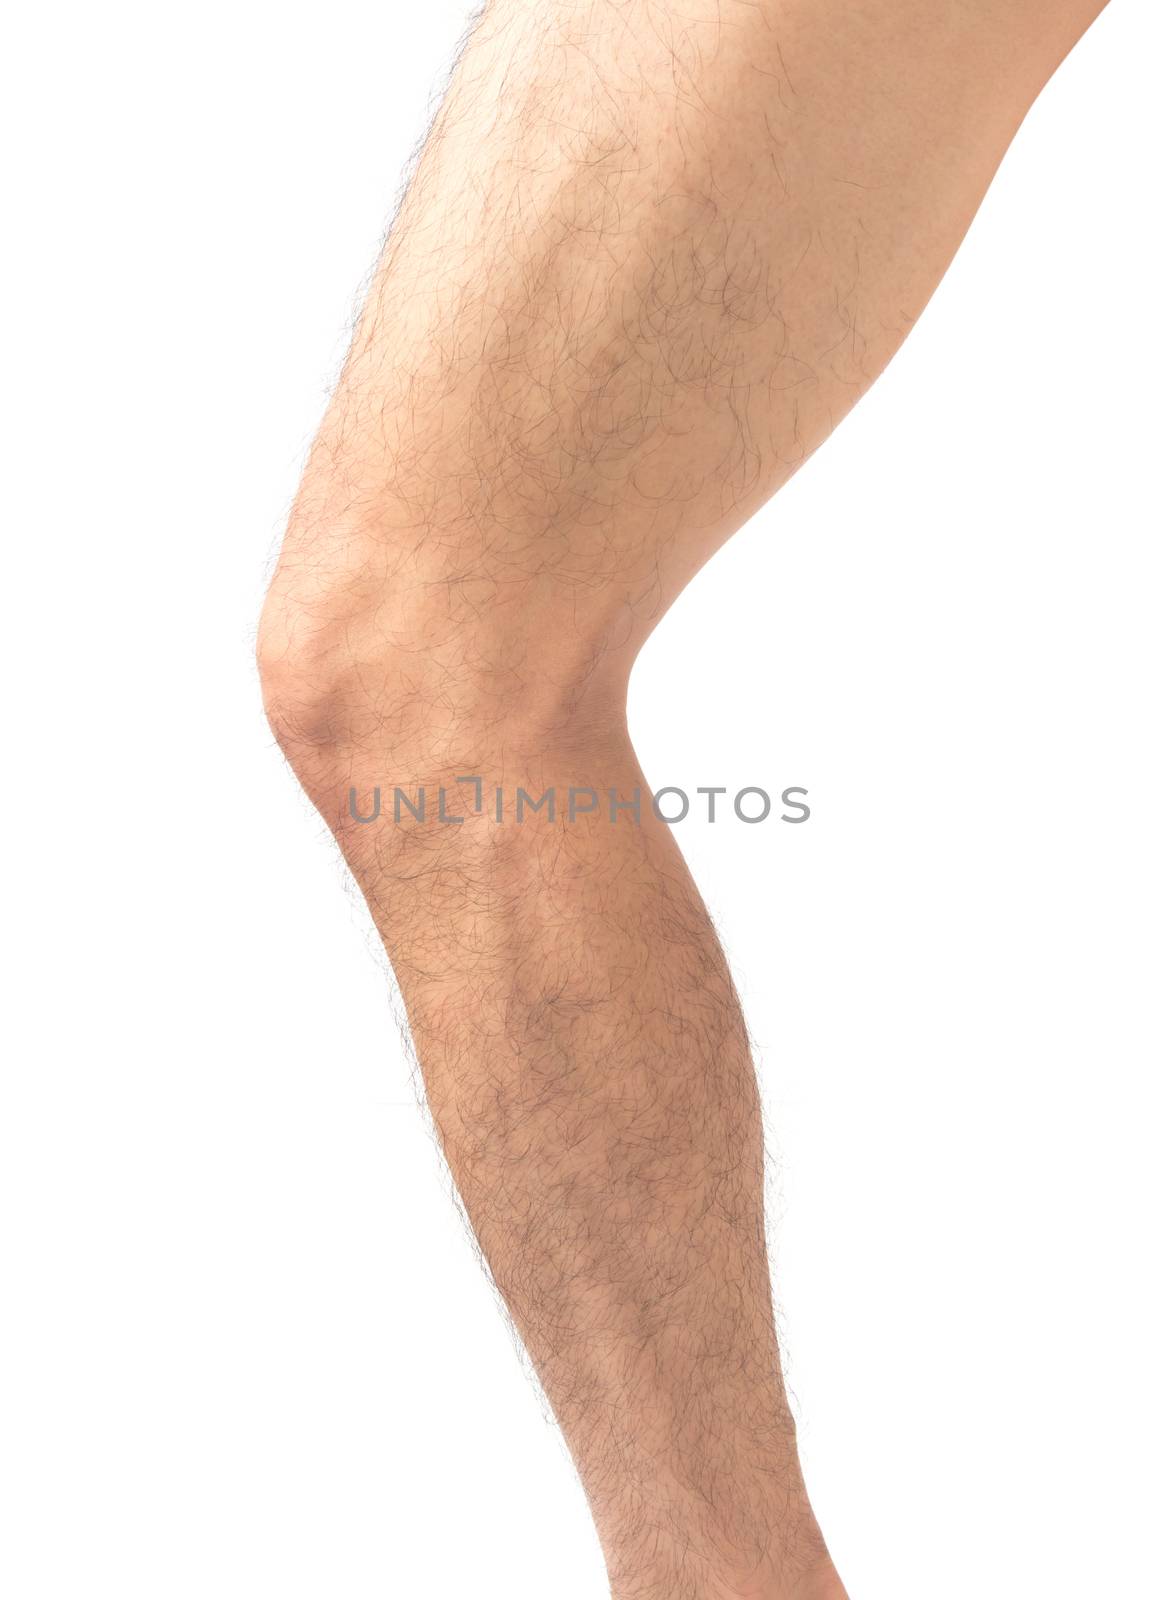 Closeup leg men skin and hairy with white background, health care and medical concept